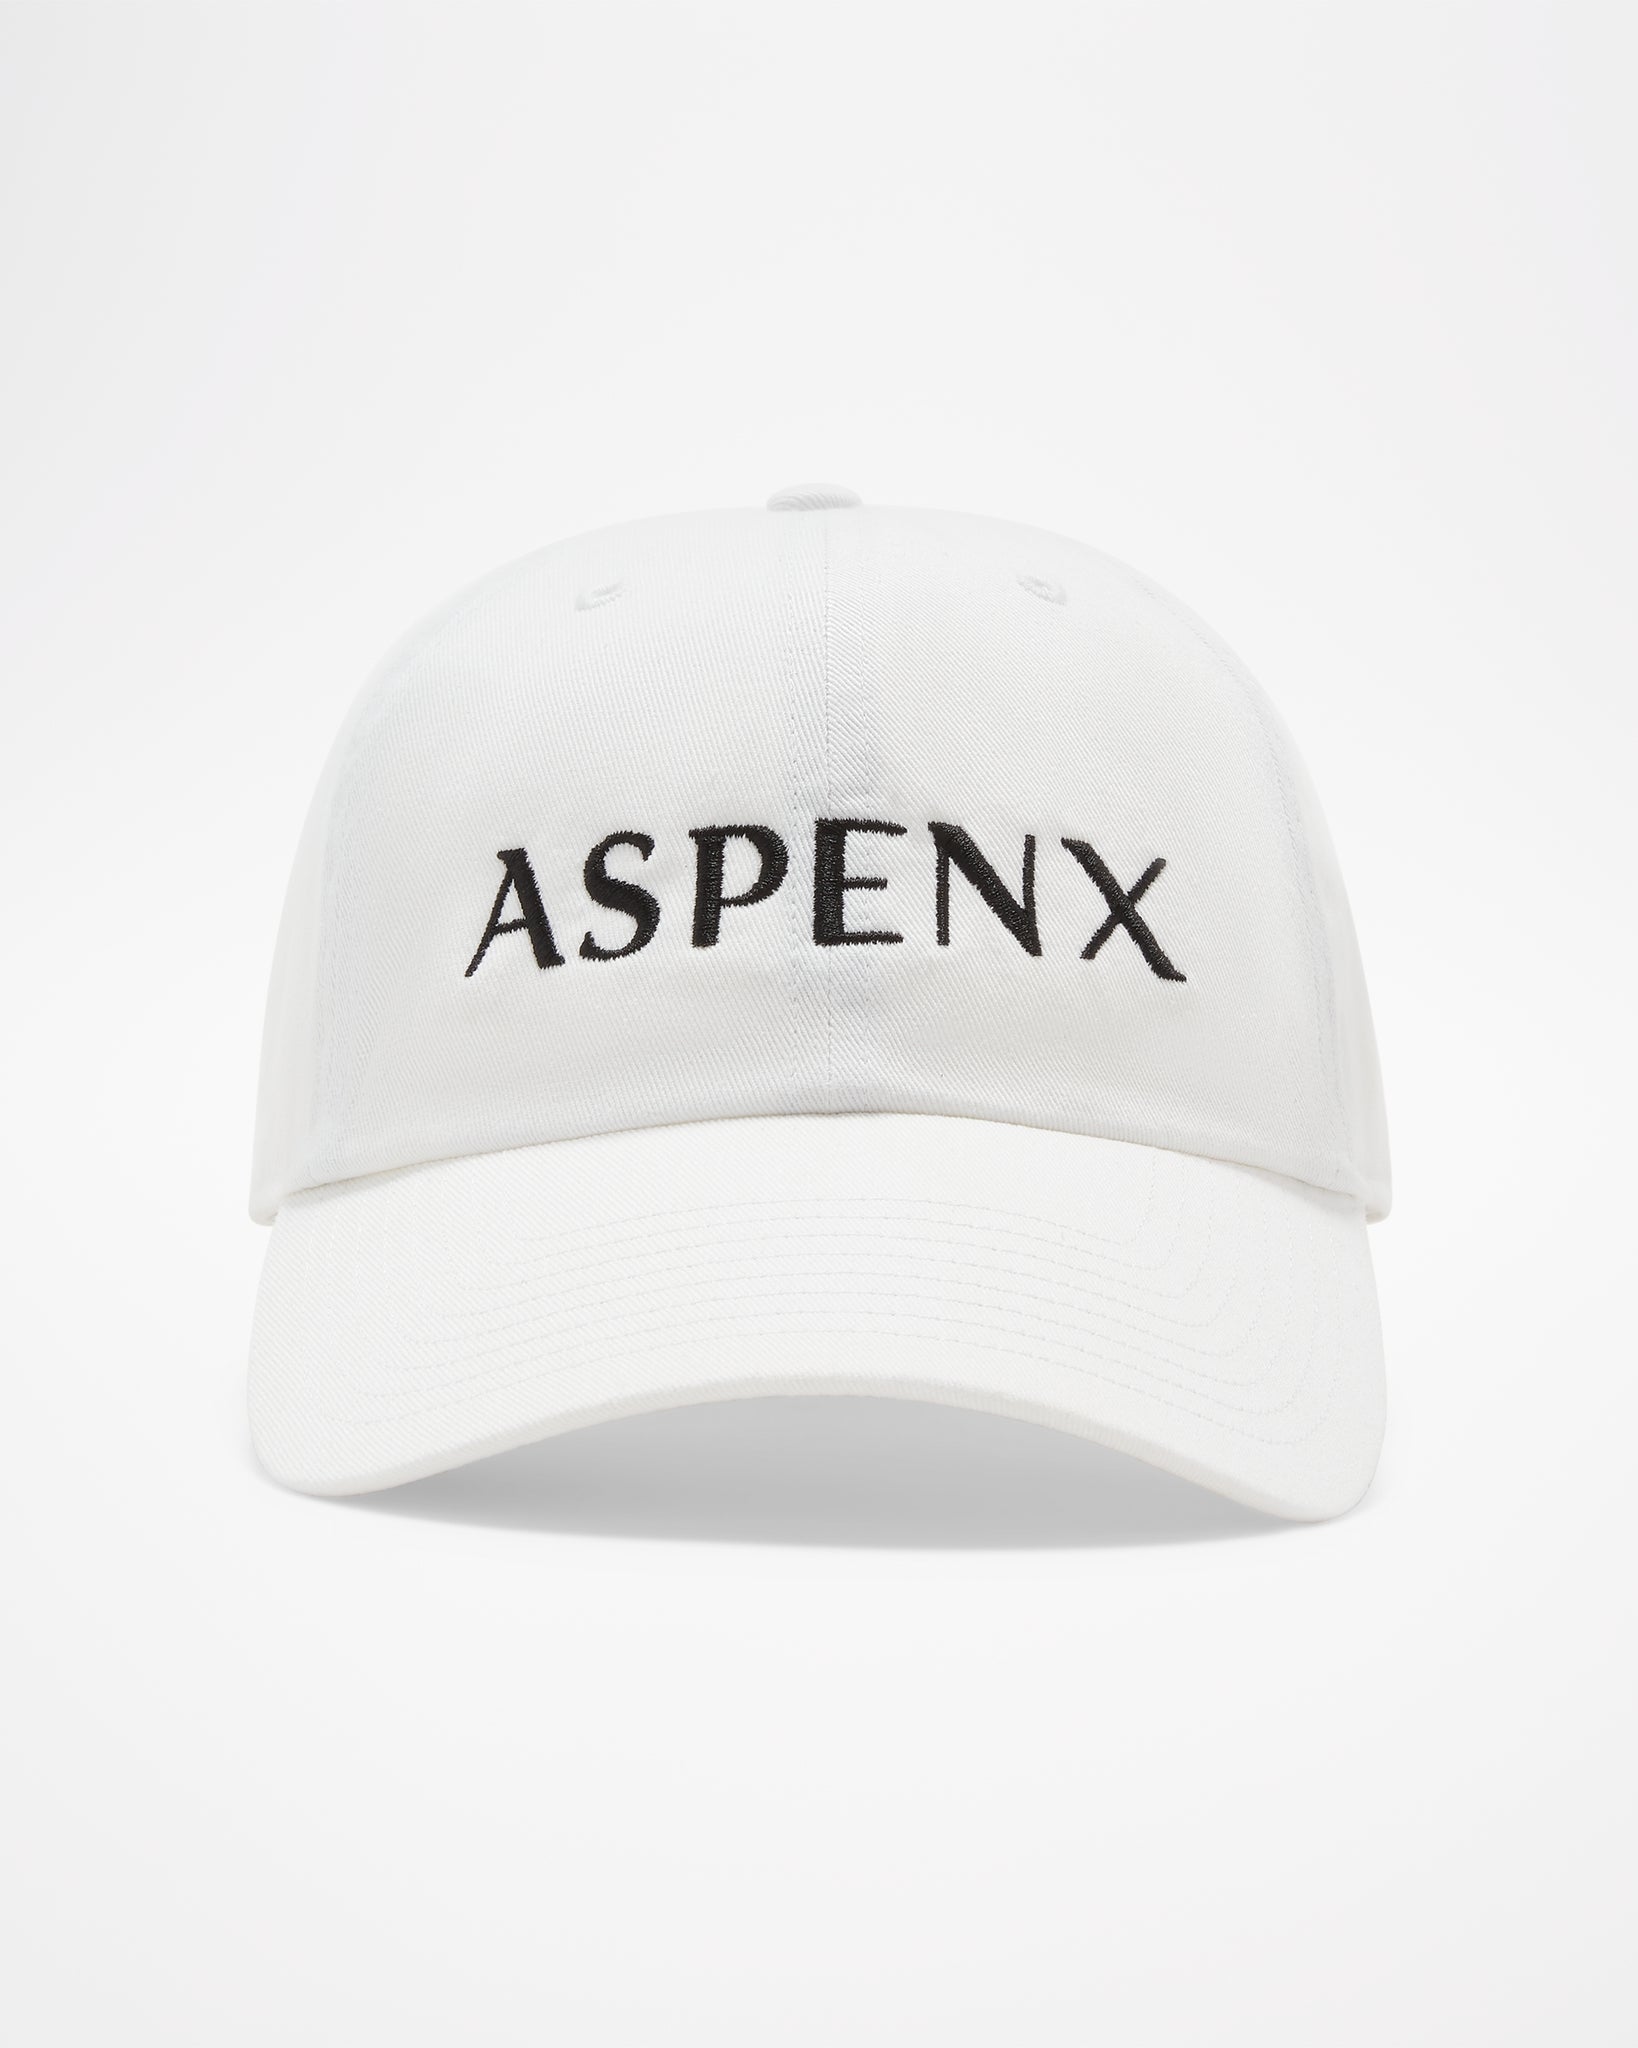 ASPENX Clean Up Hat White Front